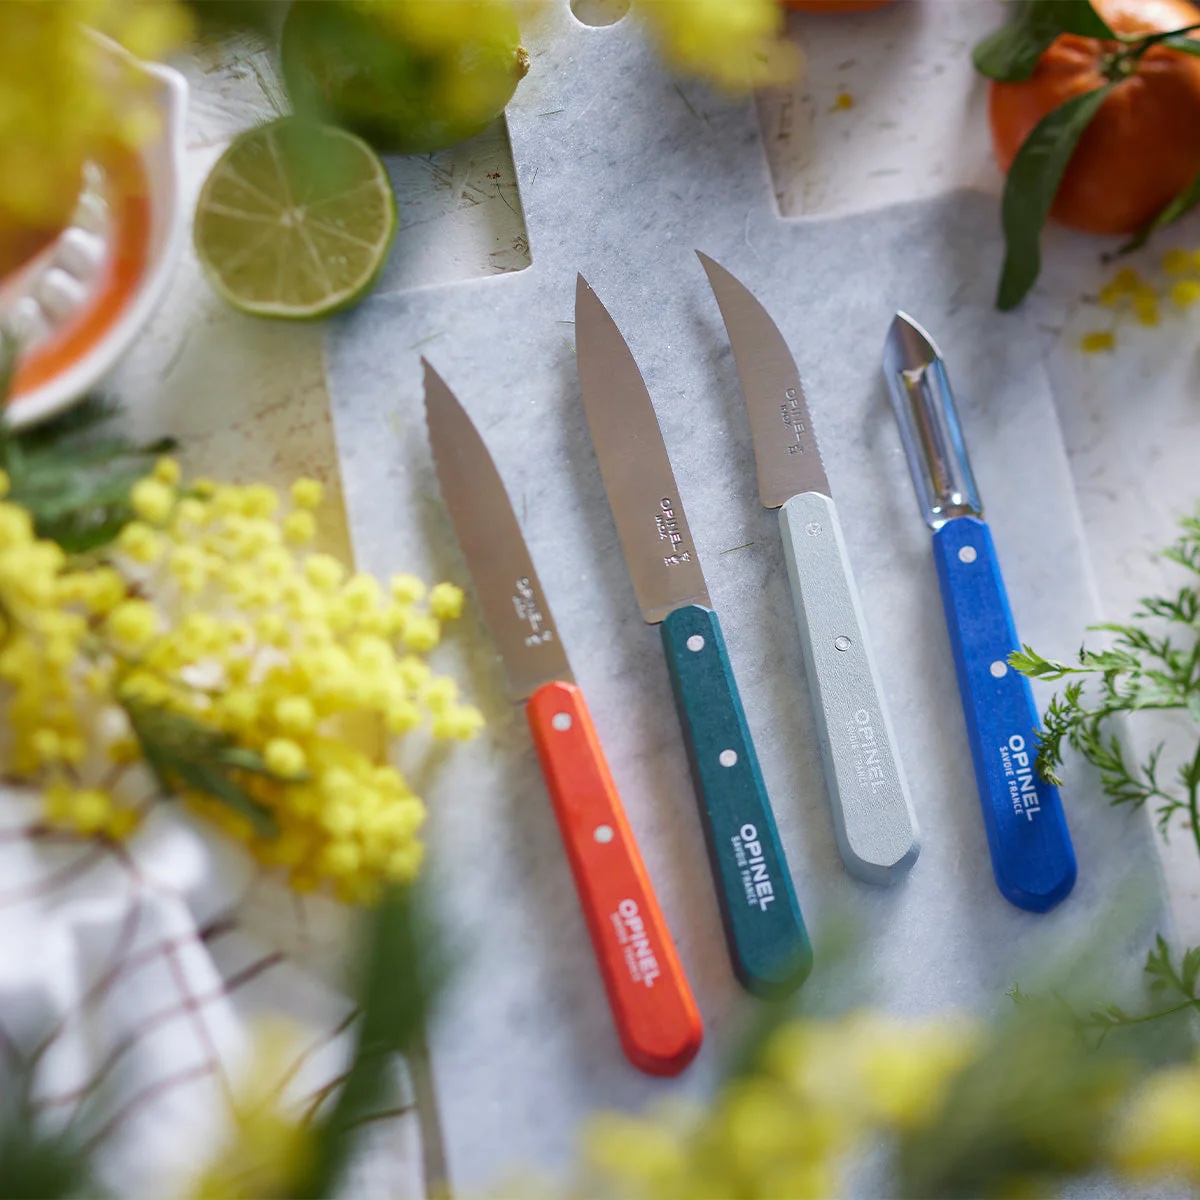 https://coolhunting.com/wp-content/uploads/2023/07/Essential-Small-Kitchen-Knife-Set-Small-Kitchen-Knife.jpg